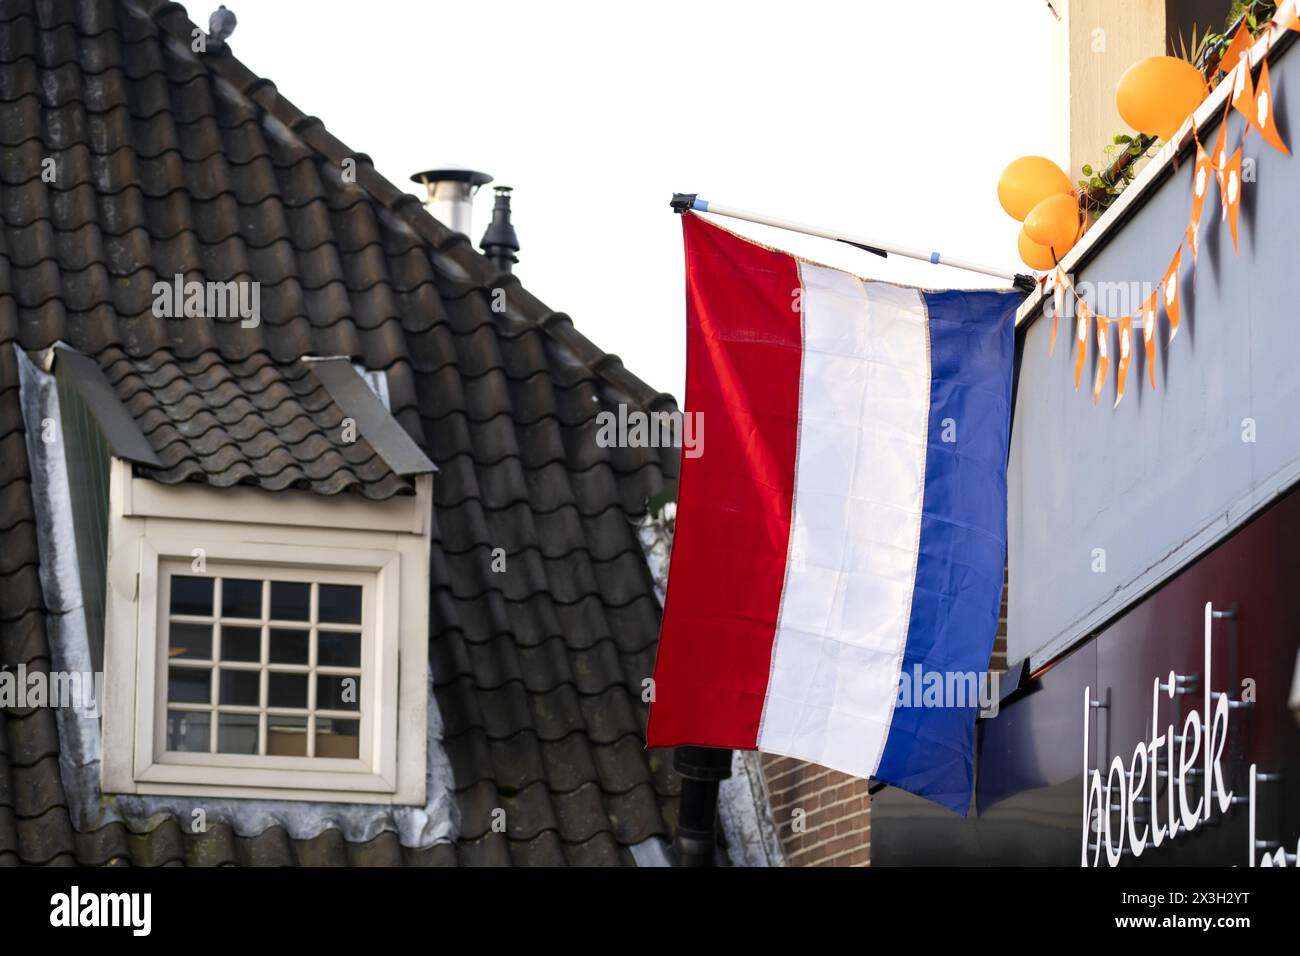 EMMEN - The Dutch flag is flying for King's Day. While the royal family visits Emmen, the national holiday is also being fully celebrated in the rest of the country. ANP SANDER KONING netherlands out - belgium out Stock Photo